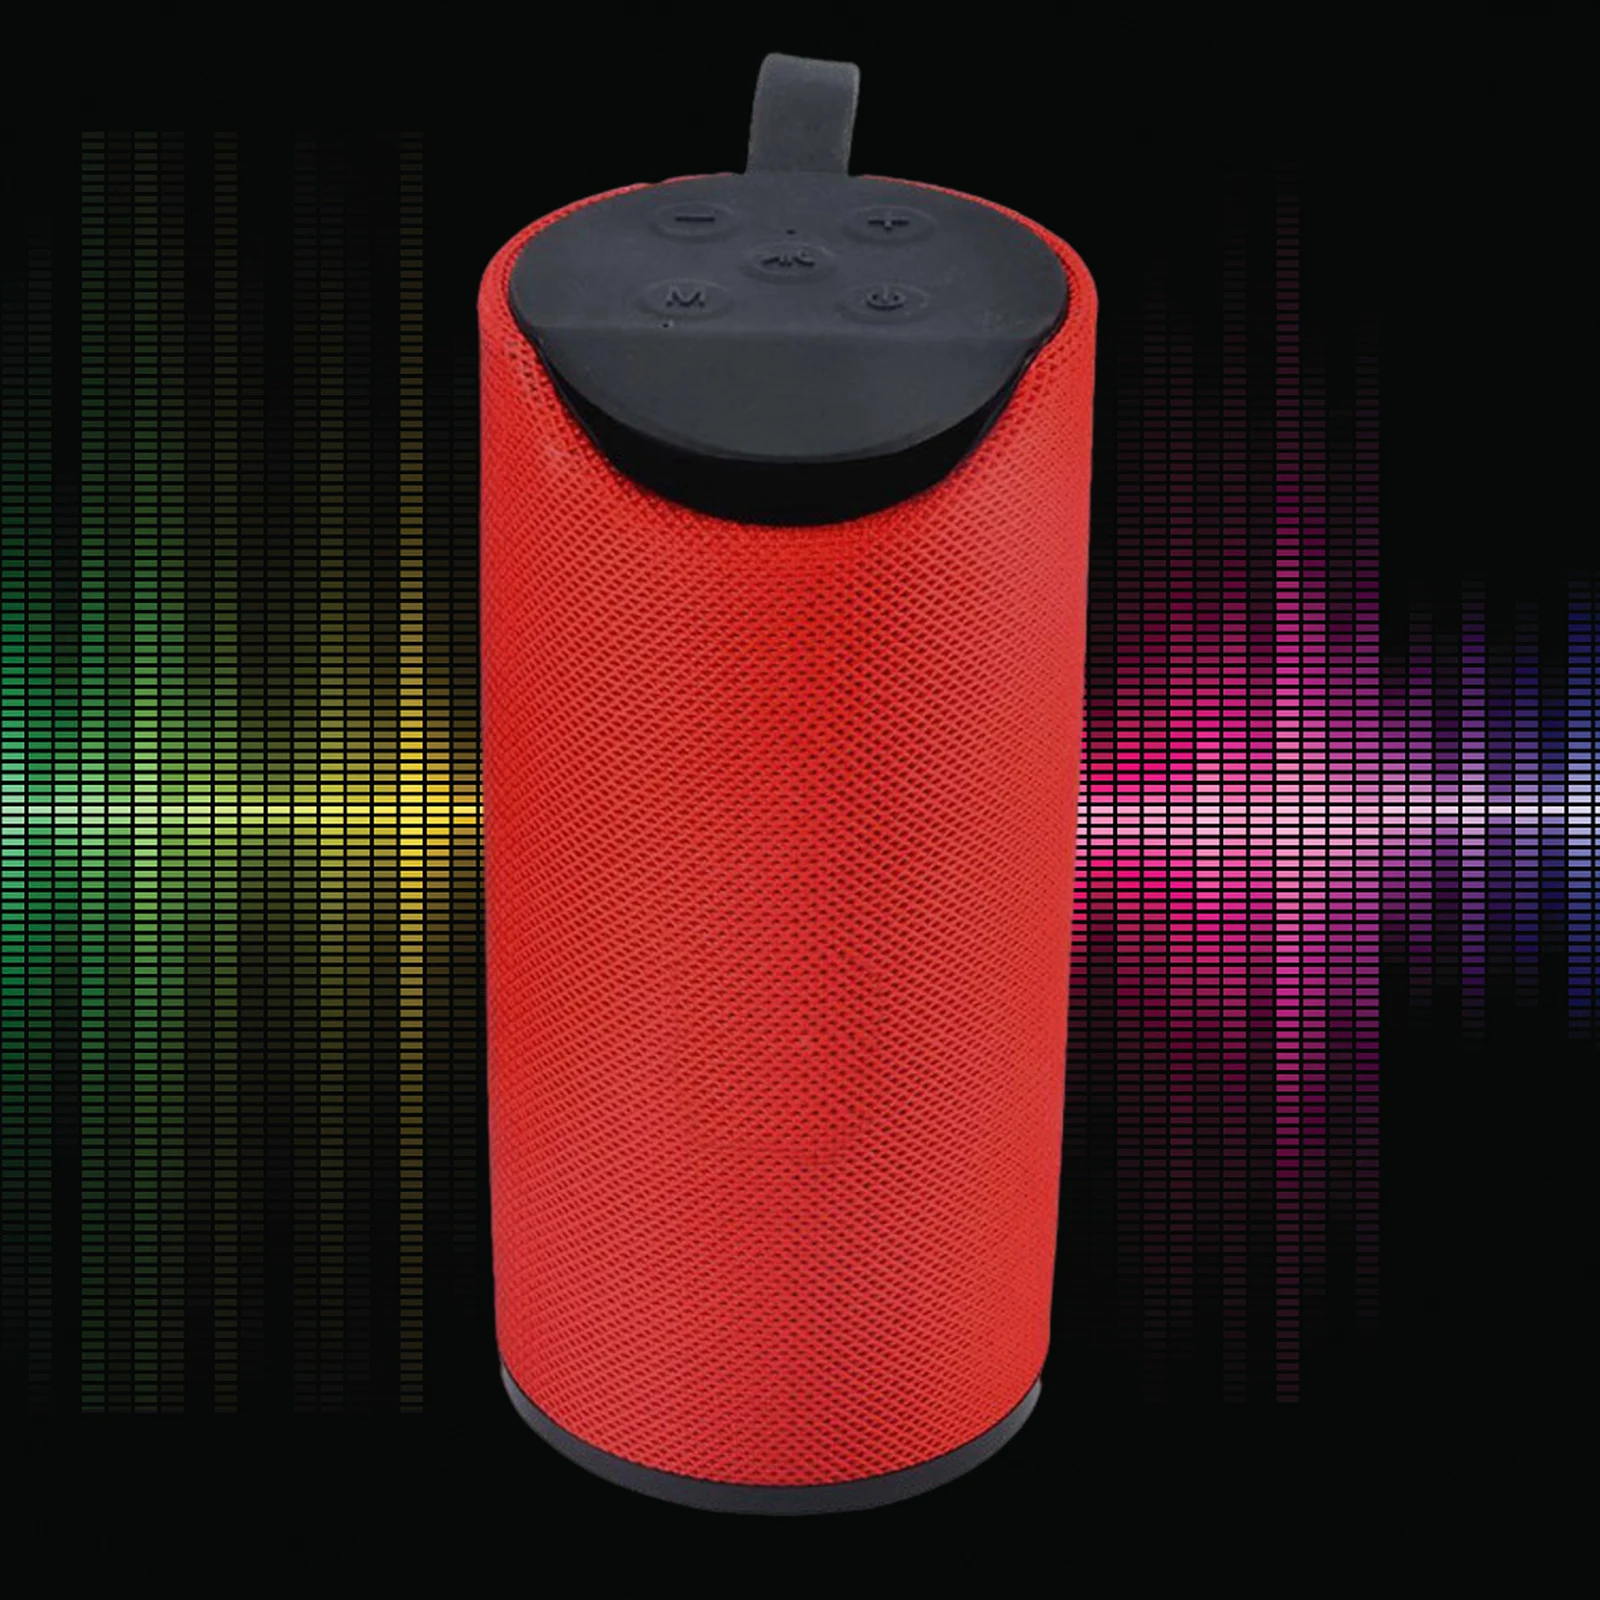 Portable Bluetooth Speaker Wireless 5.0 800mAh Strong Sound Built-in Mic Outdoor Cycling Bicycle Travel Accessories